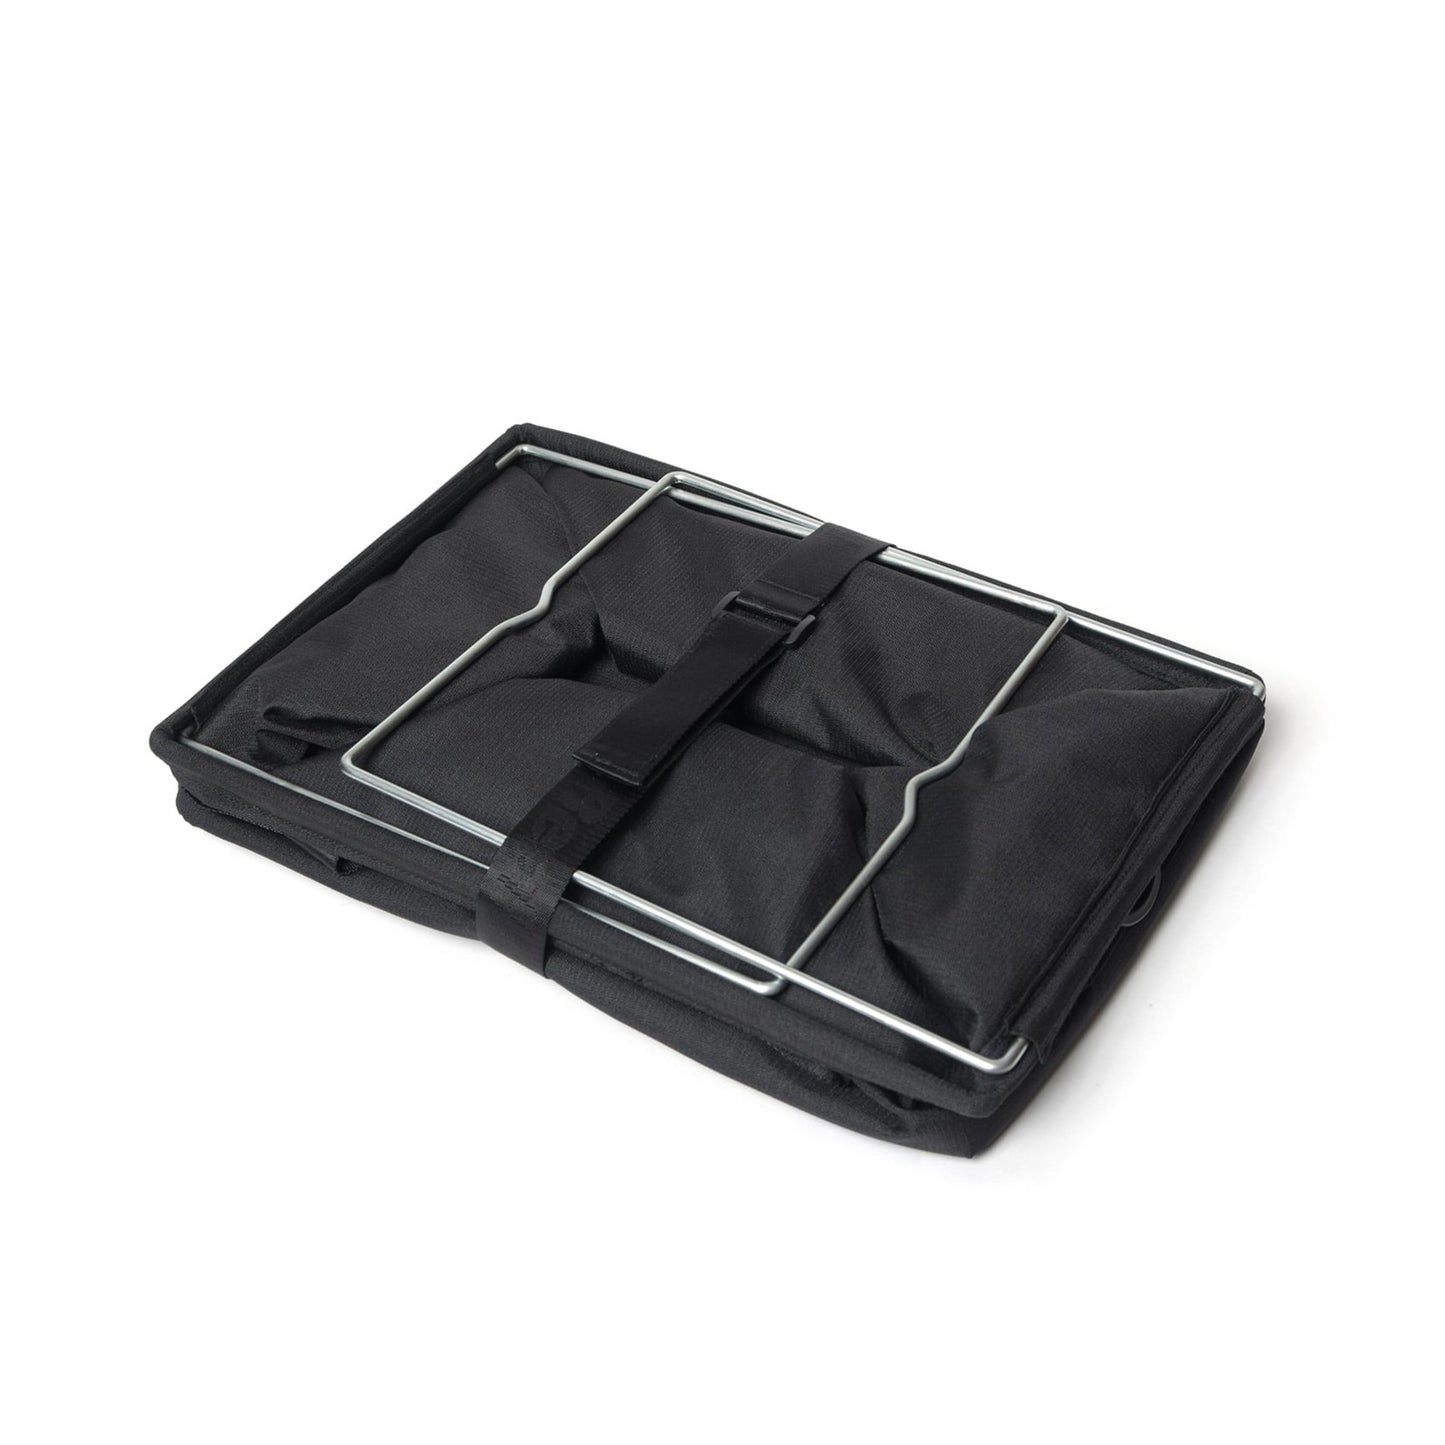 FOLDING STORAGE SOFT CONTAINER